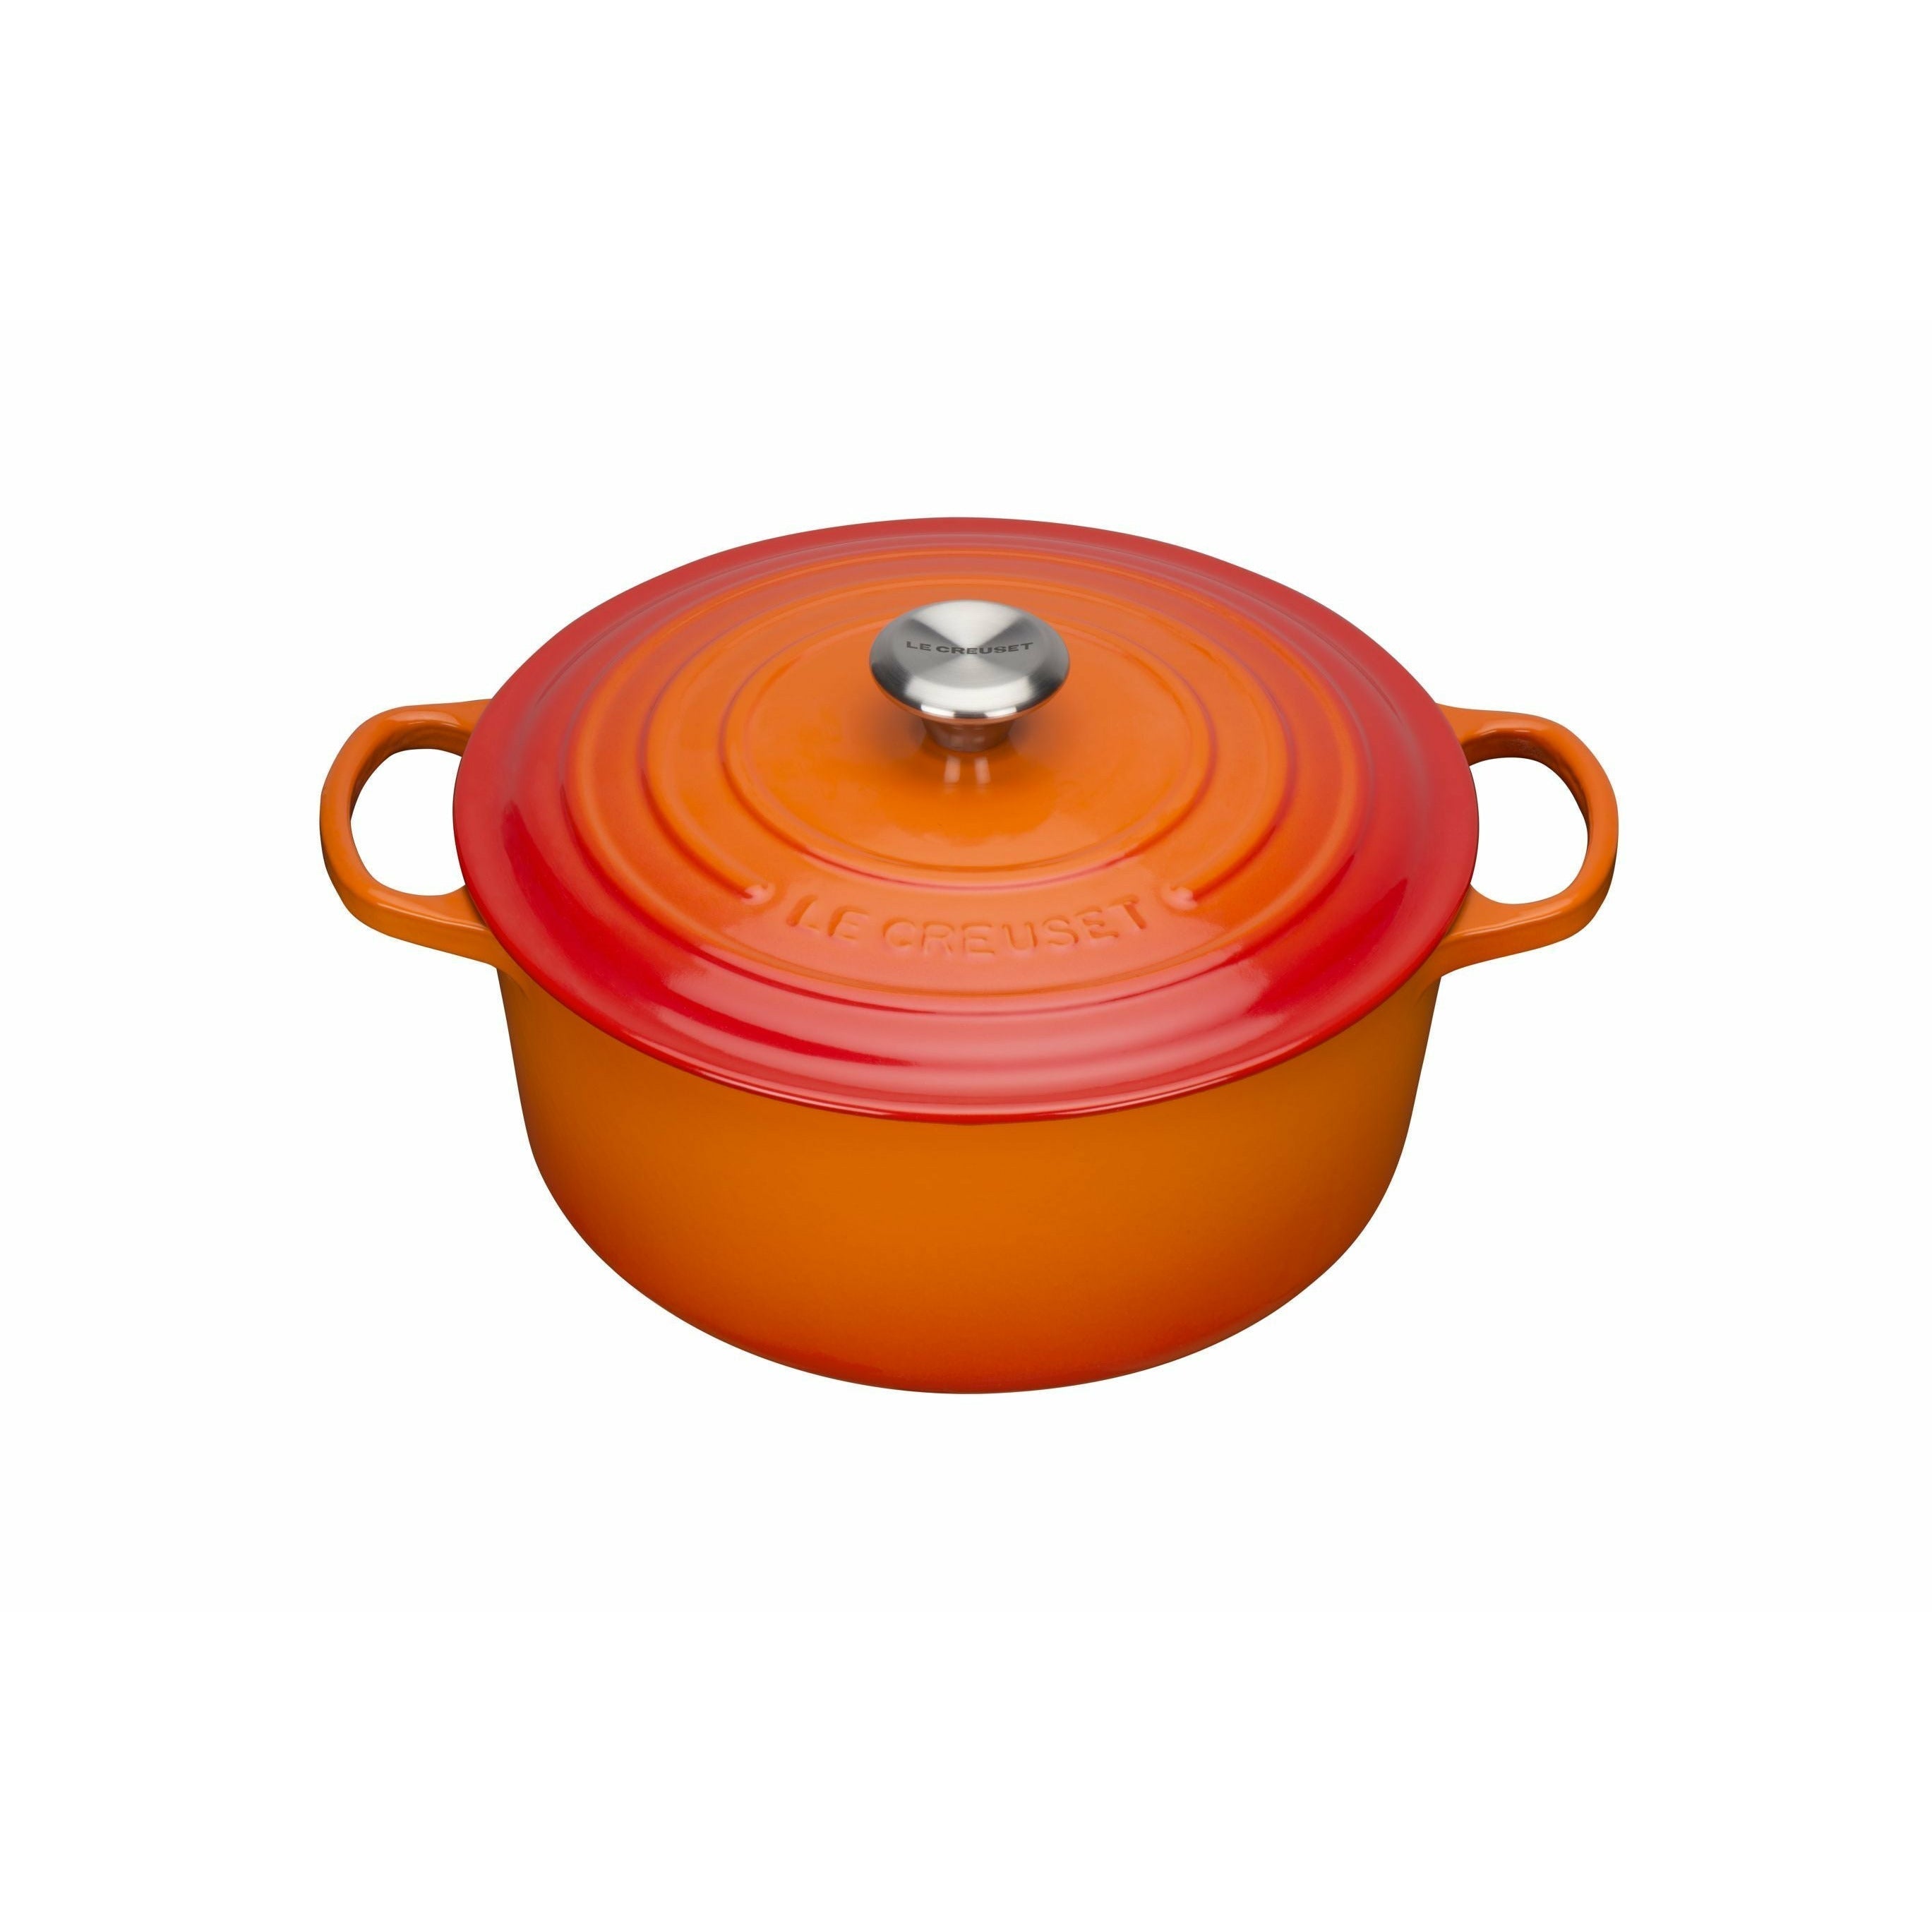 Le Creuset Signature Round Roaster 28 cm, oven rood